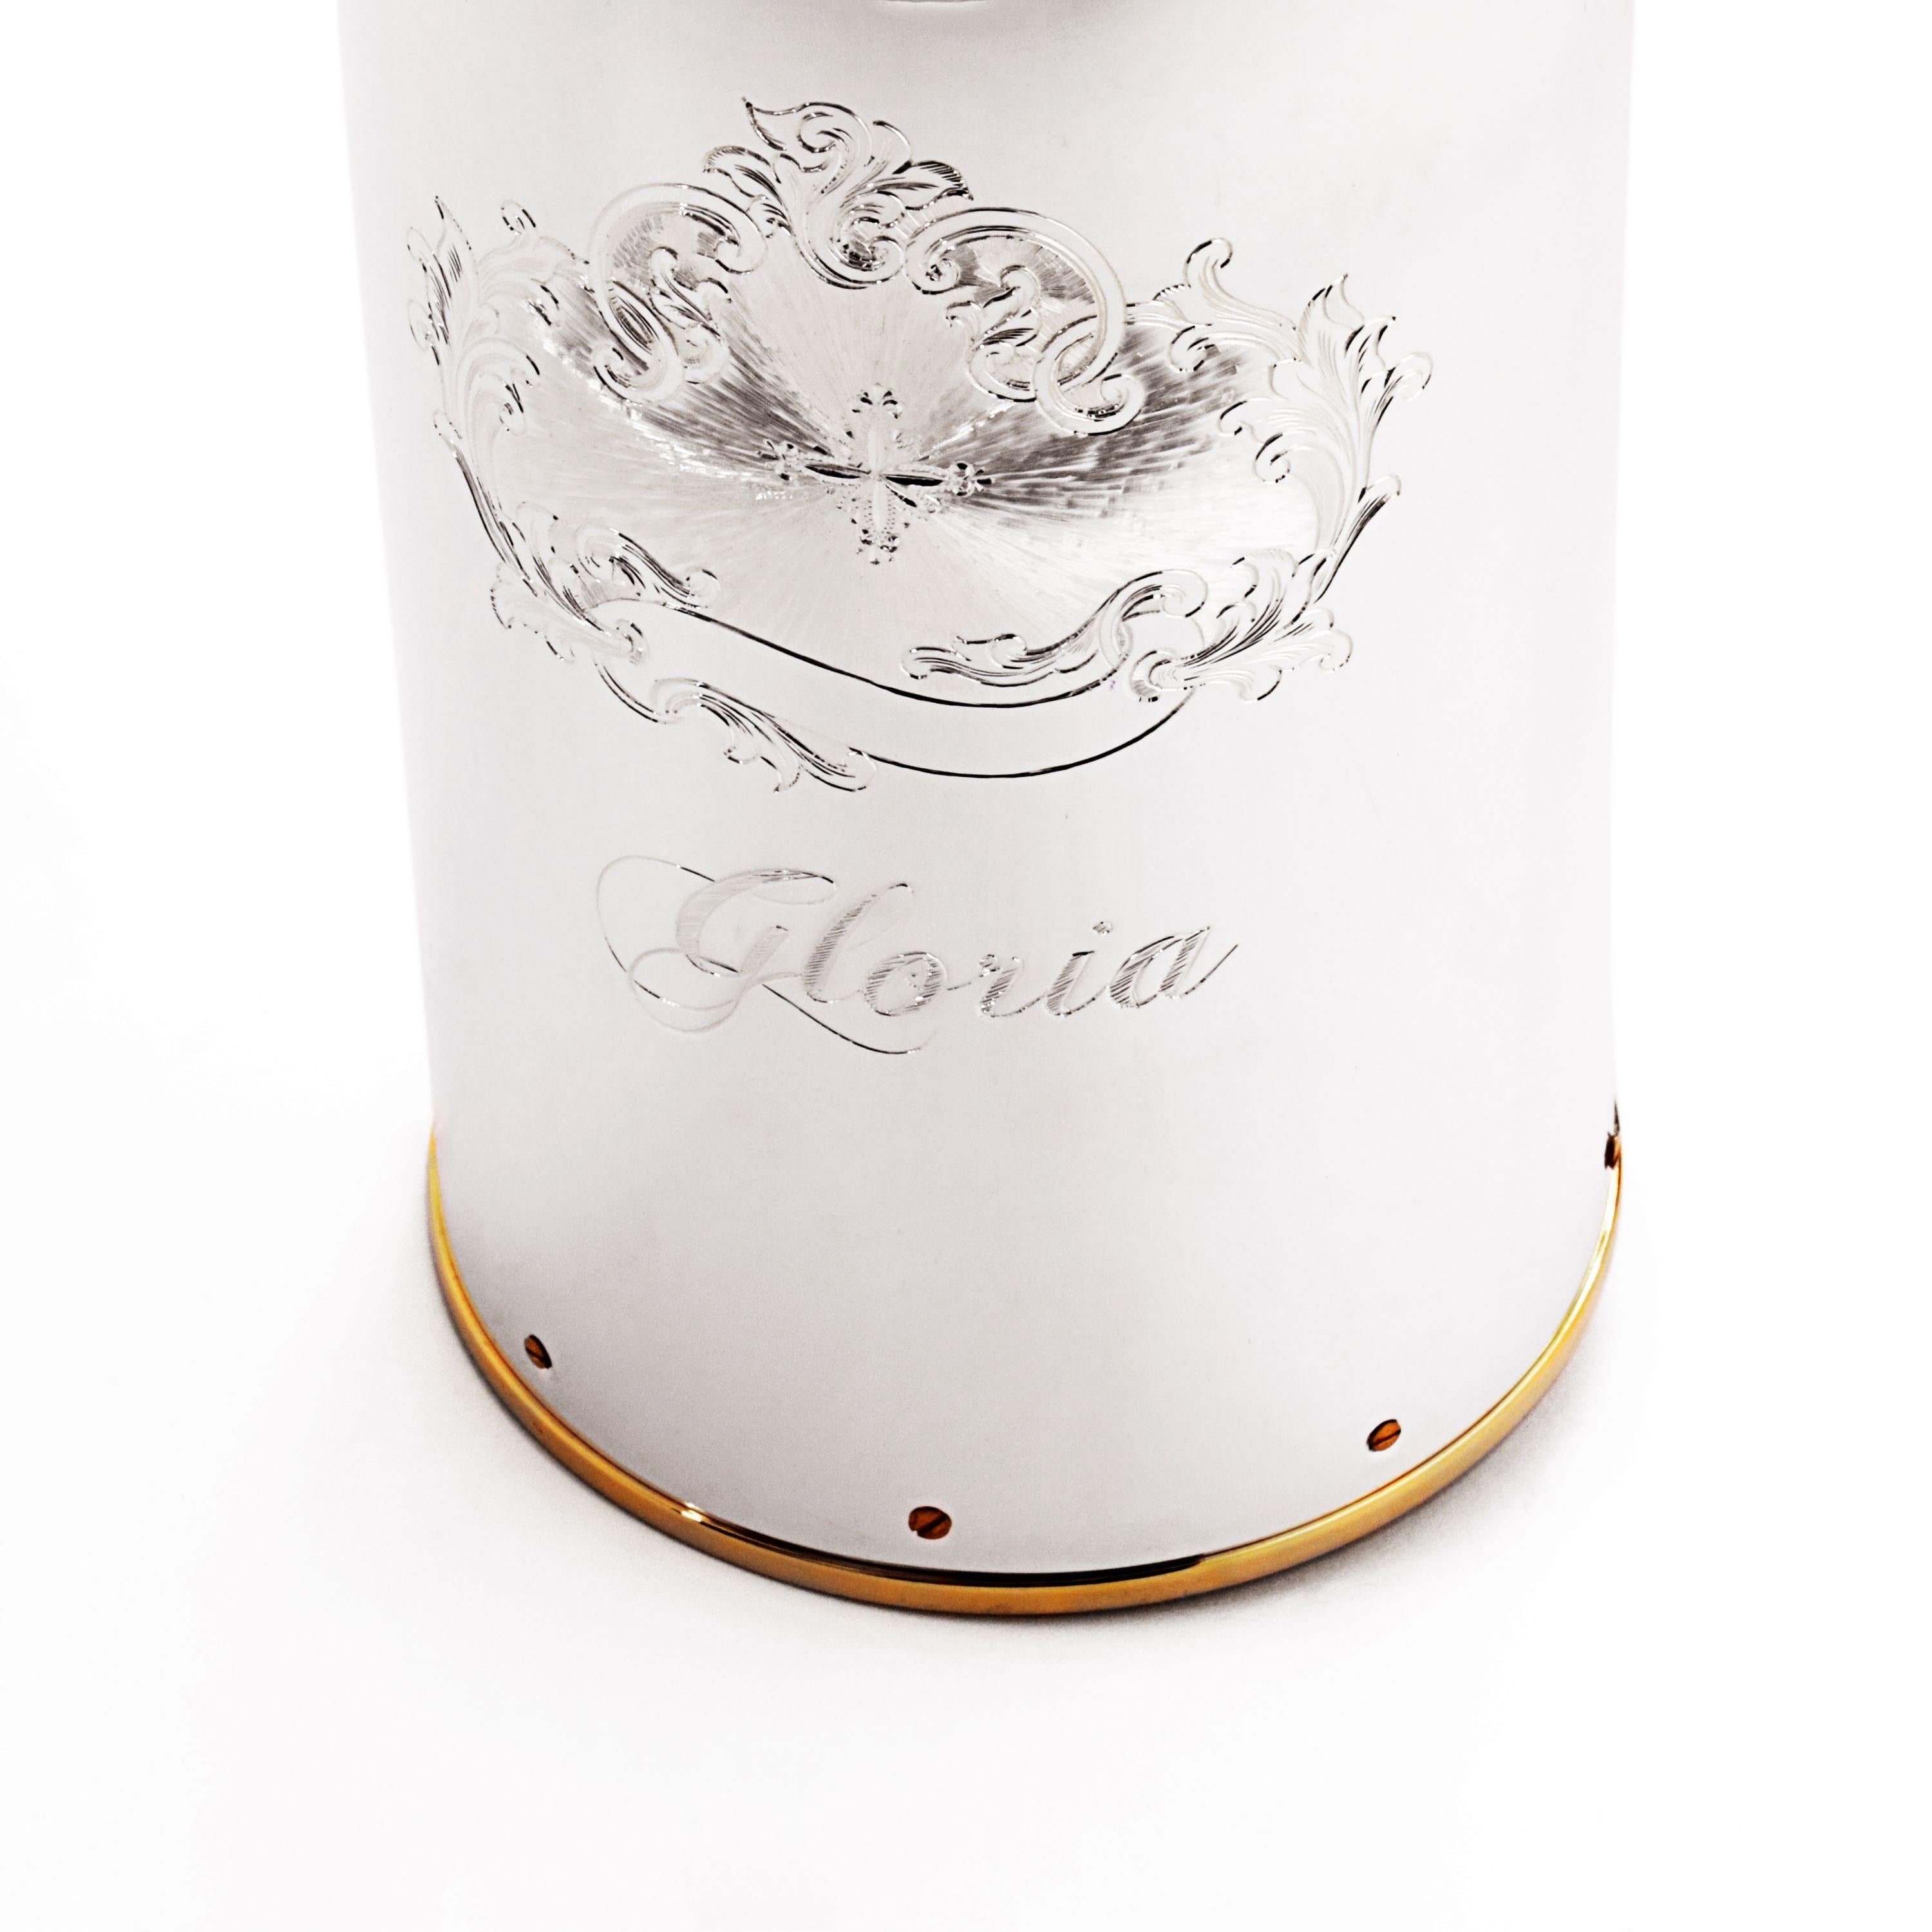 GLORY:
Our K-OVERs, are alternatives to the champagne bucket and the more common glacette. The precious metal that holds the bottle is coated internally with a thermal fabric that maintains the temperature of your champagne bottles. Le opere sono